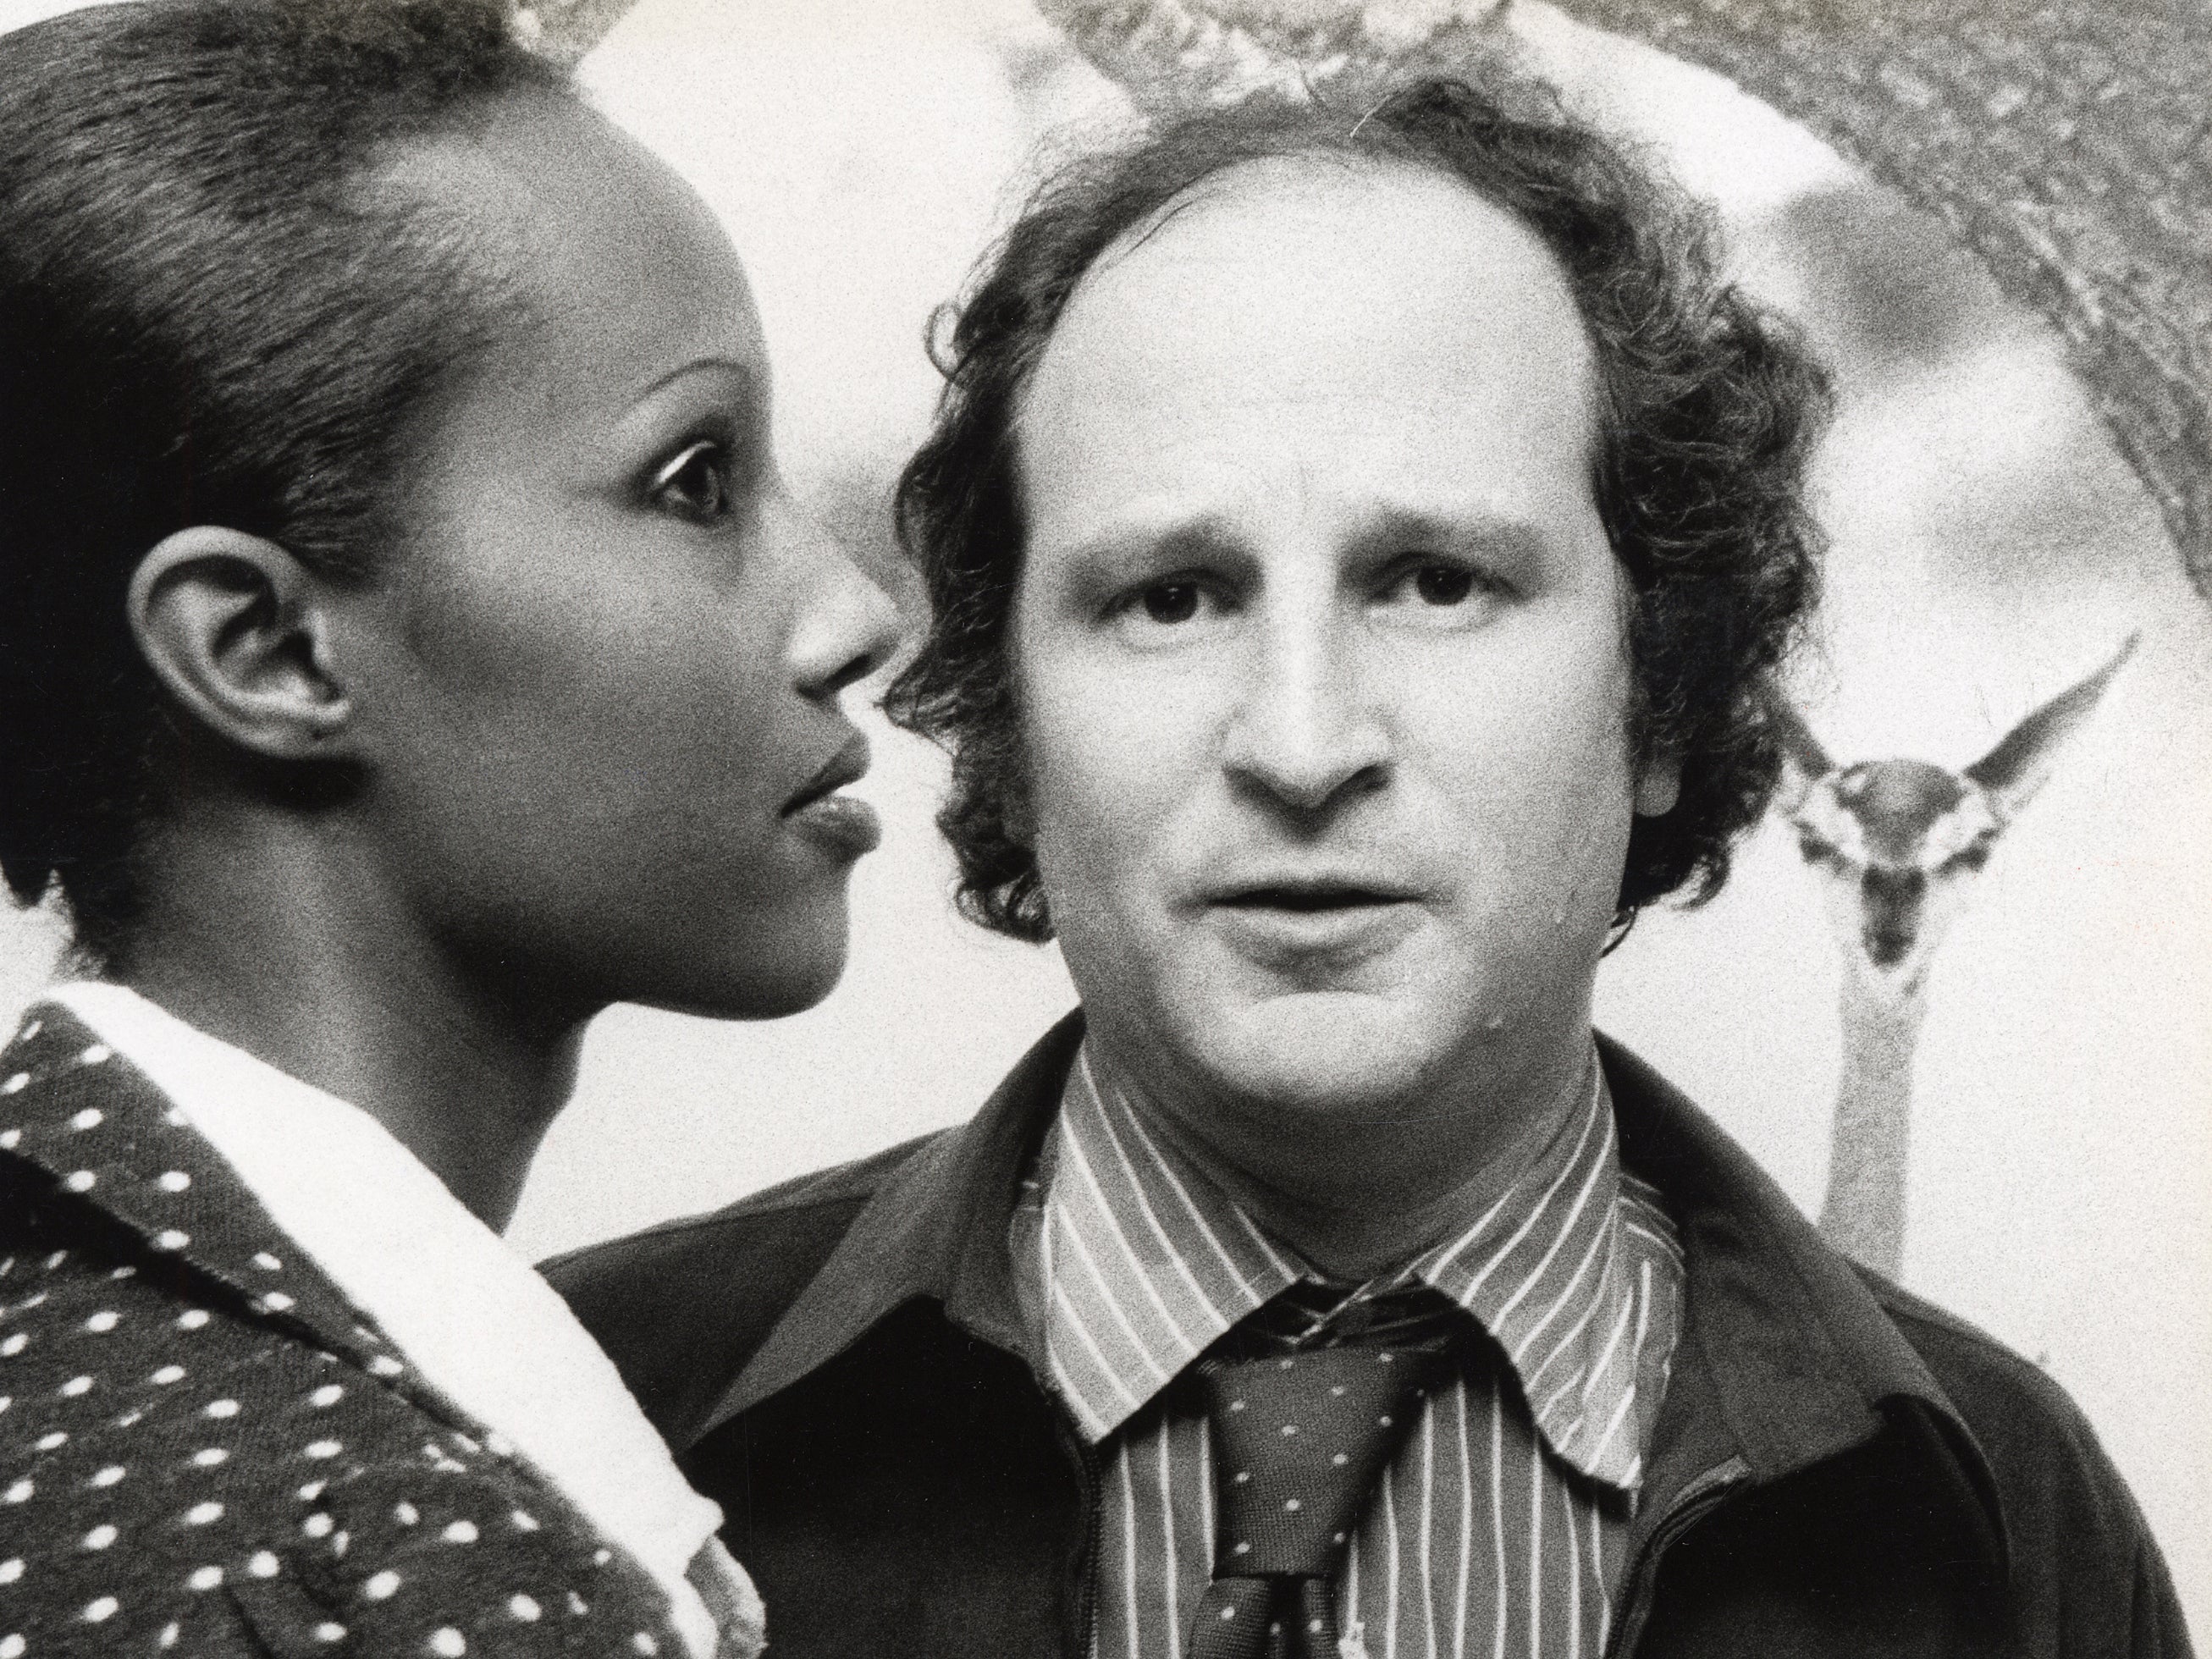 With Iman at Peter Beard’s photo opening in New York, in 1975